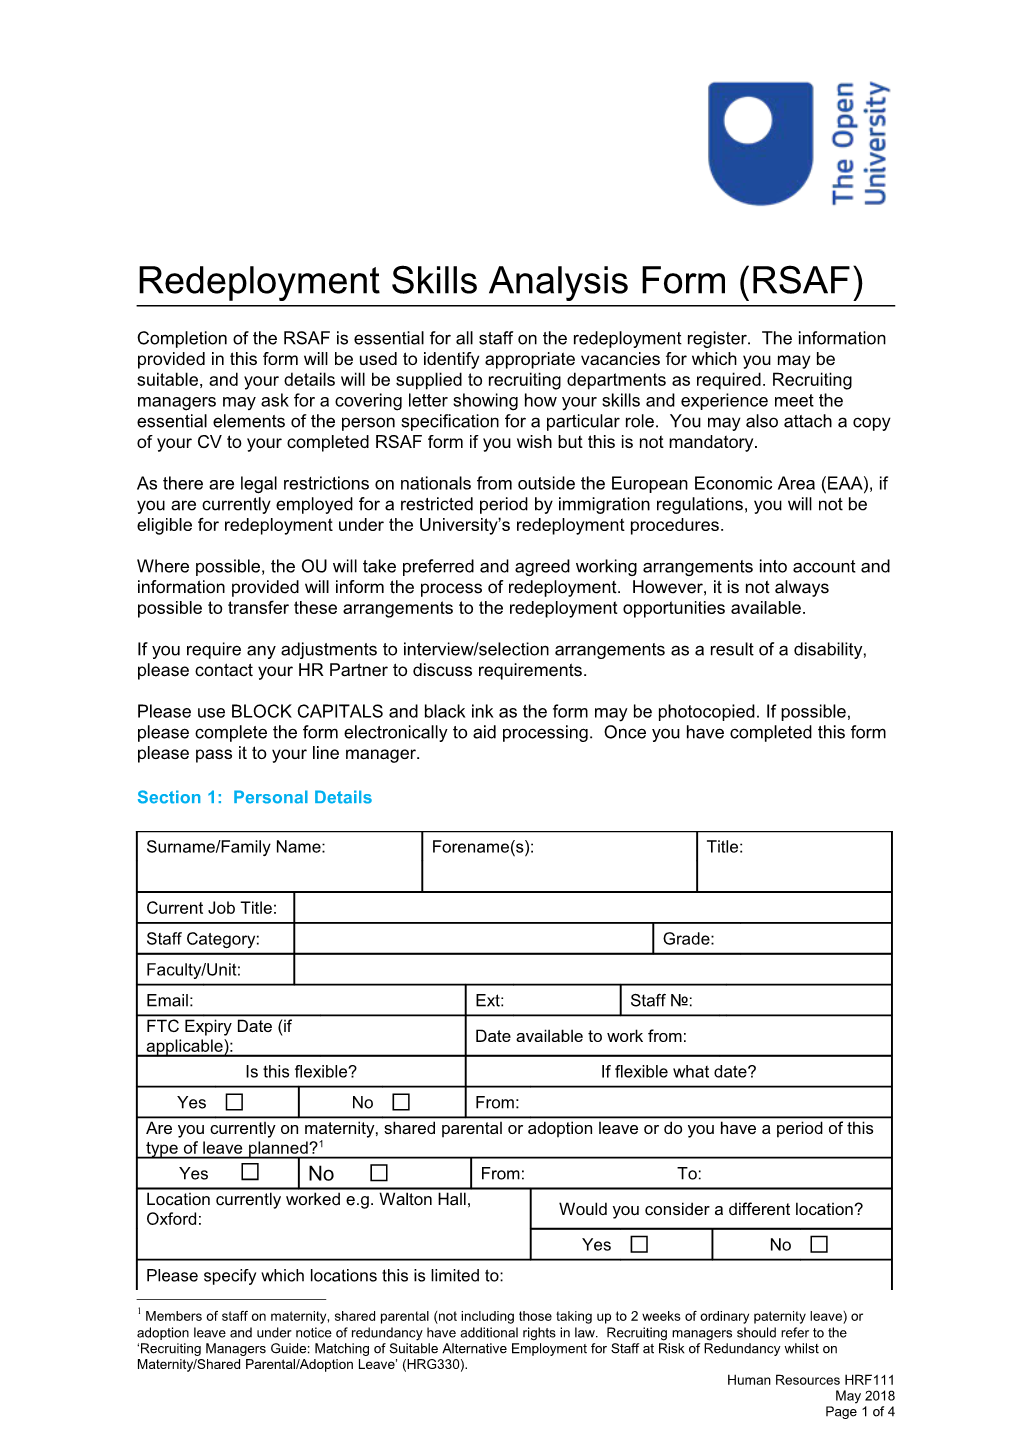 Redeployment Skills Analysis Form (RSAF): Staff at Risk of Redundancy Whilst on Maternity/Shared